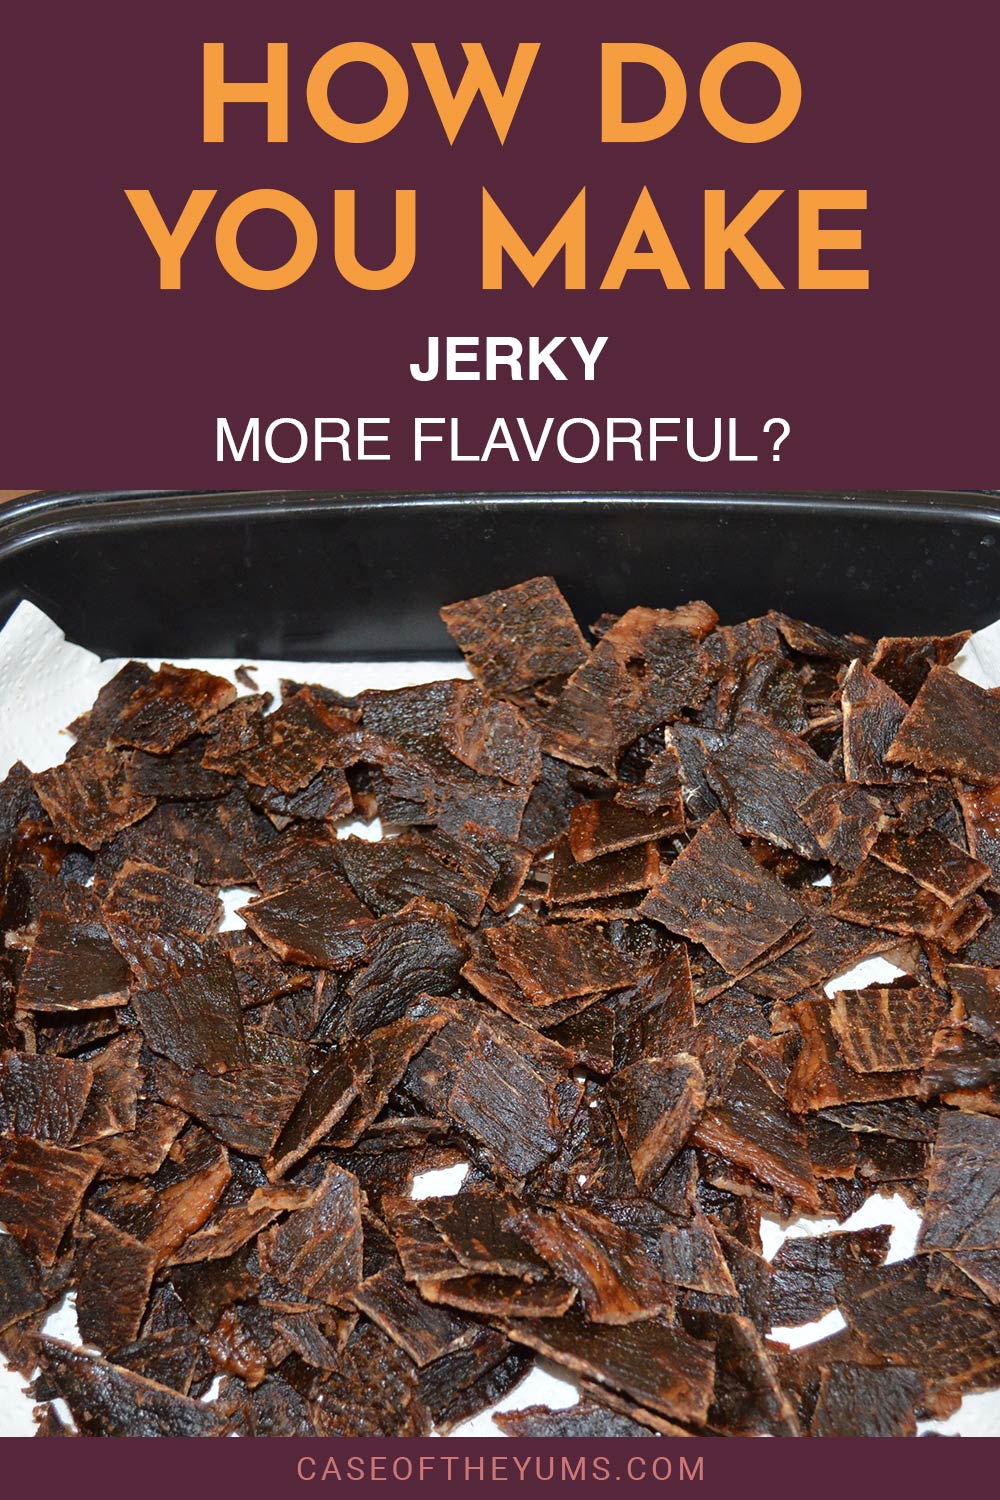 Pieces of jerky on a tray - How Do You Make Jerky More Flavorful?